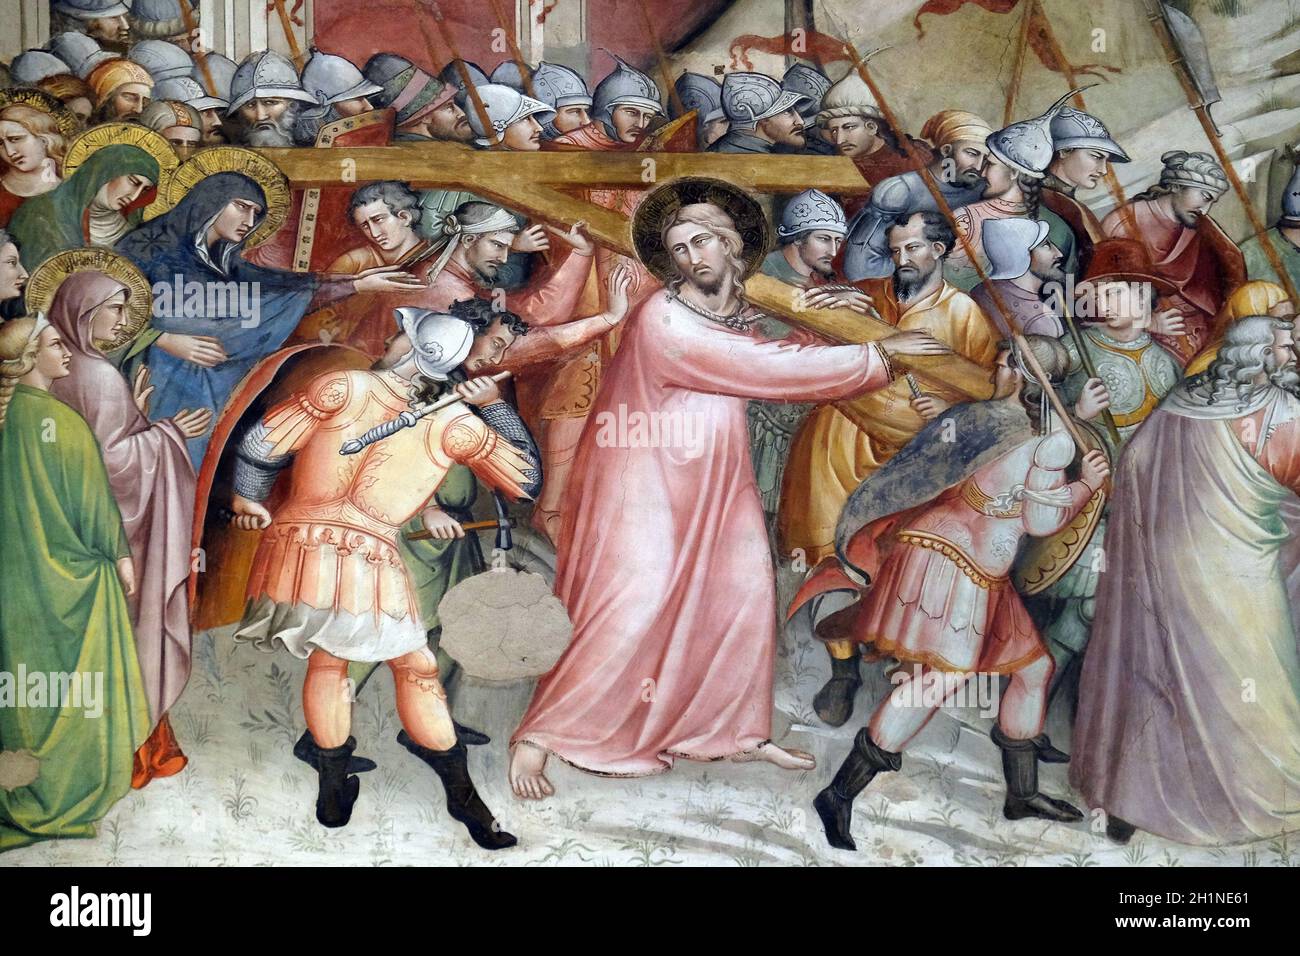 Ascent to Calvary fresco, perhaps by Spinello Aretino, Sacristy in Basilica di Santa Croce (Basilica of the Holy Cross) - famous Franciscan church in Stock Photo